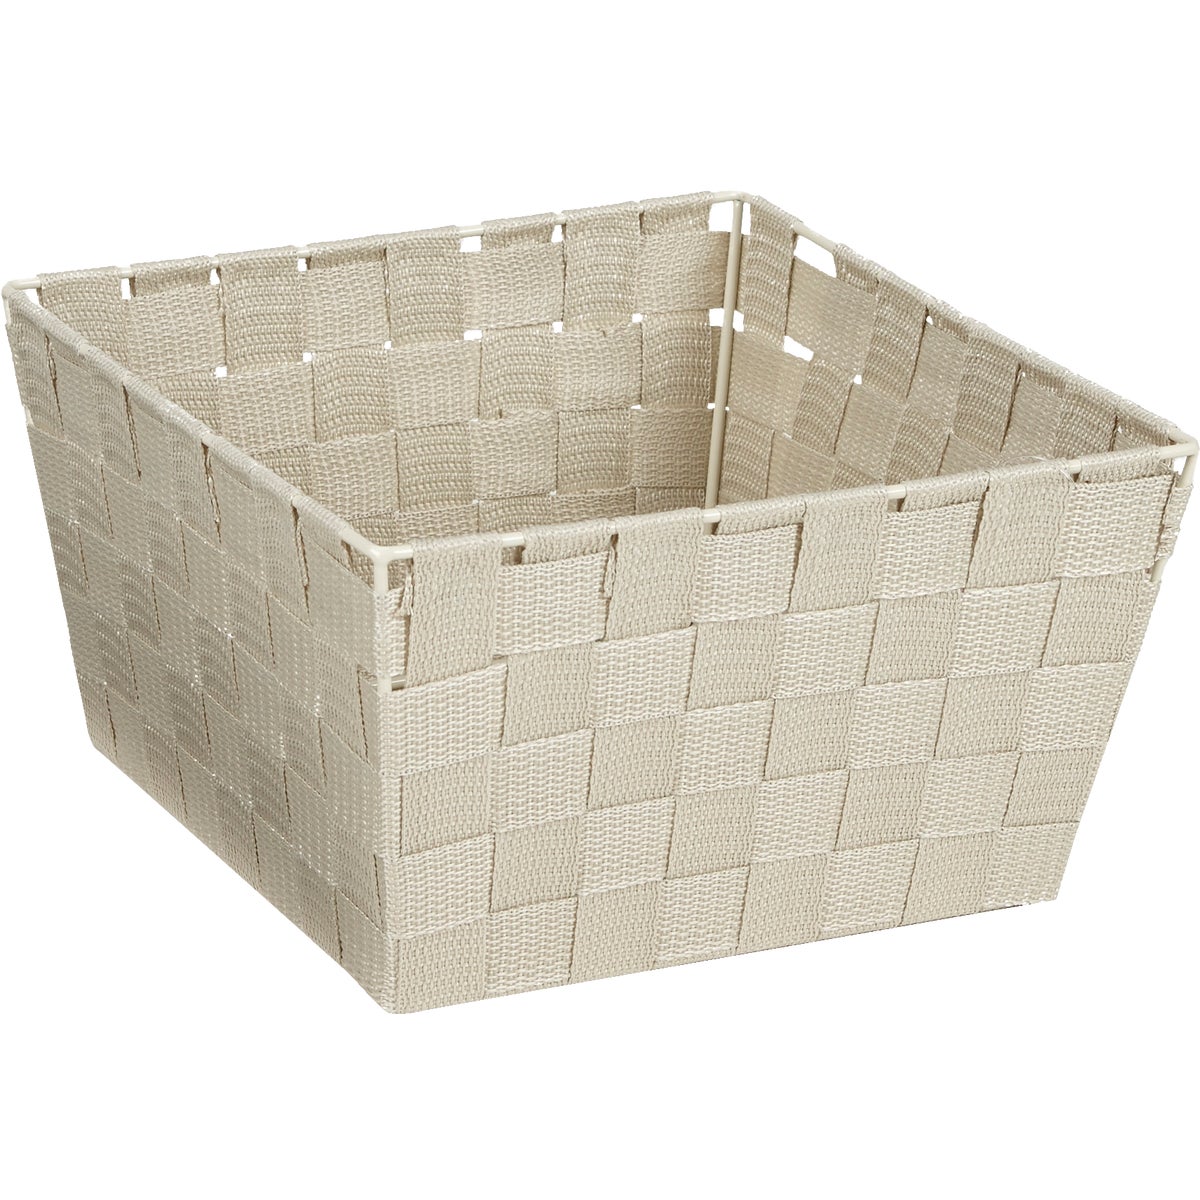 Home Impressions 9.75 In. x 5.5 In. H. Woven Storage Basket, Beige